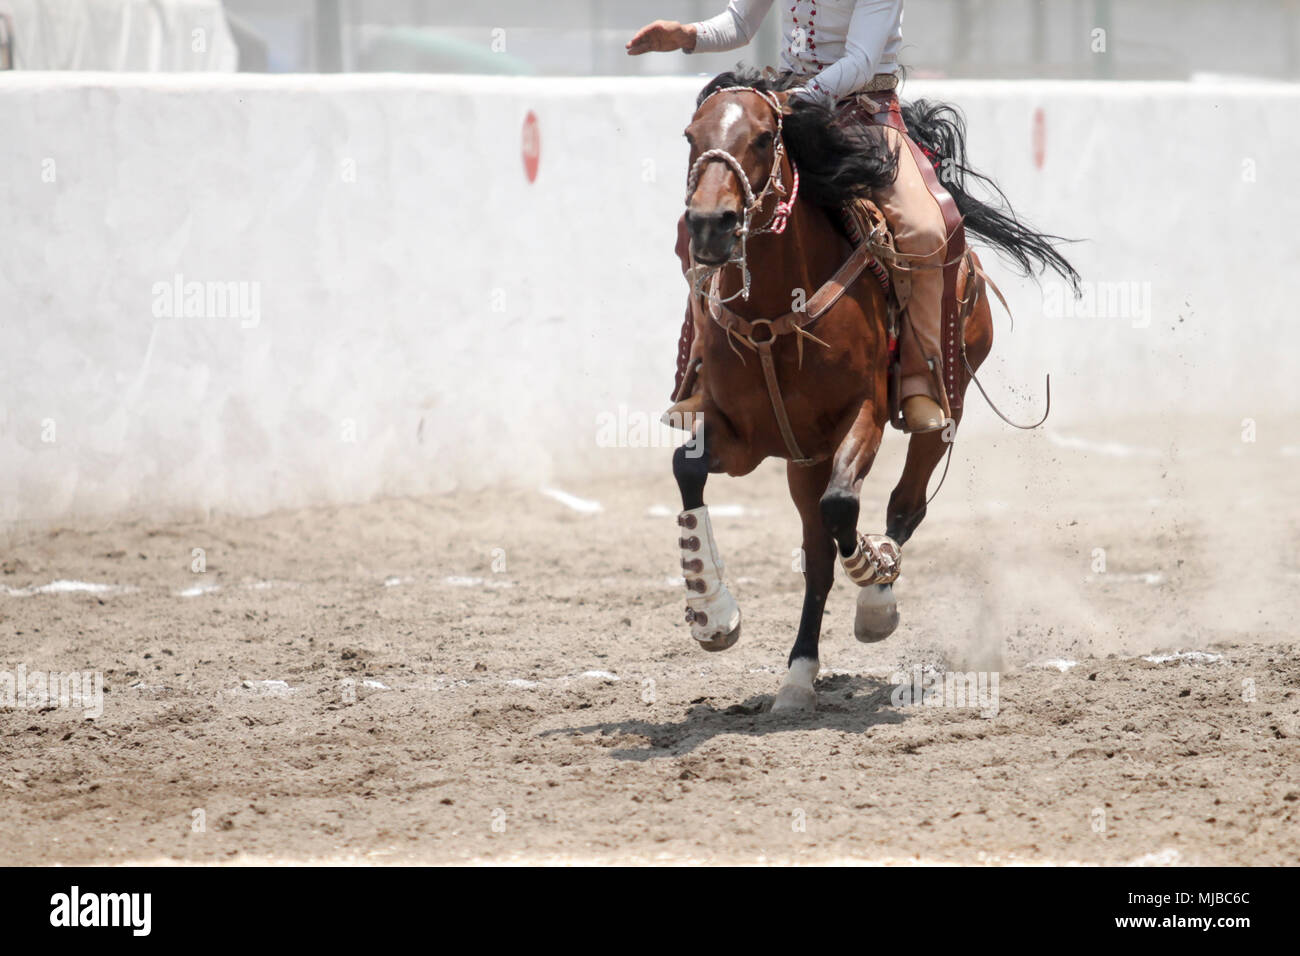 A mexican charro riding fast his horse in the dirt Stock Photo